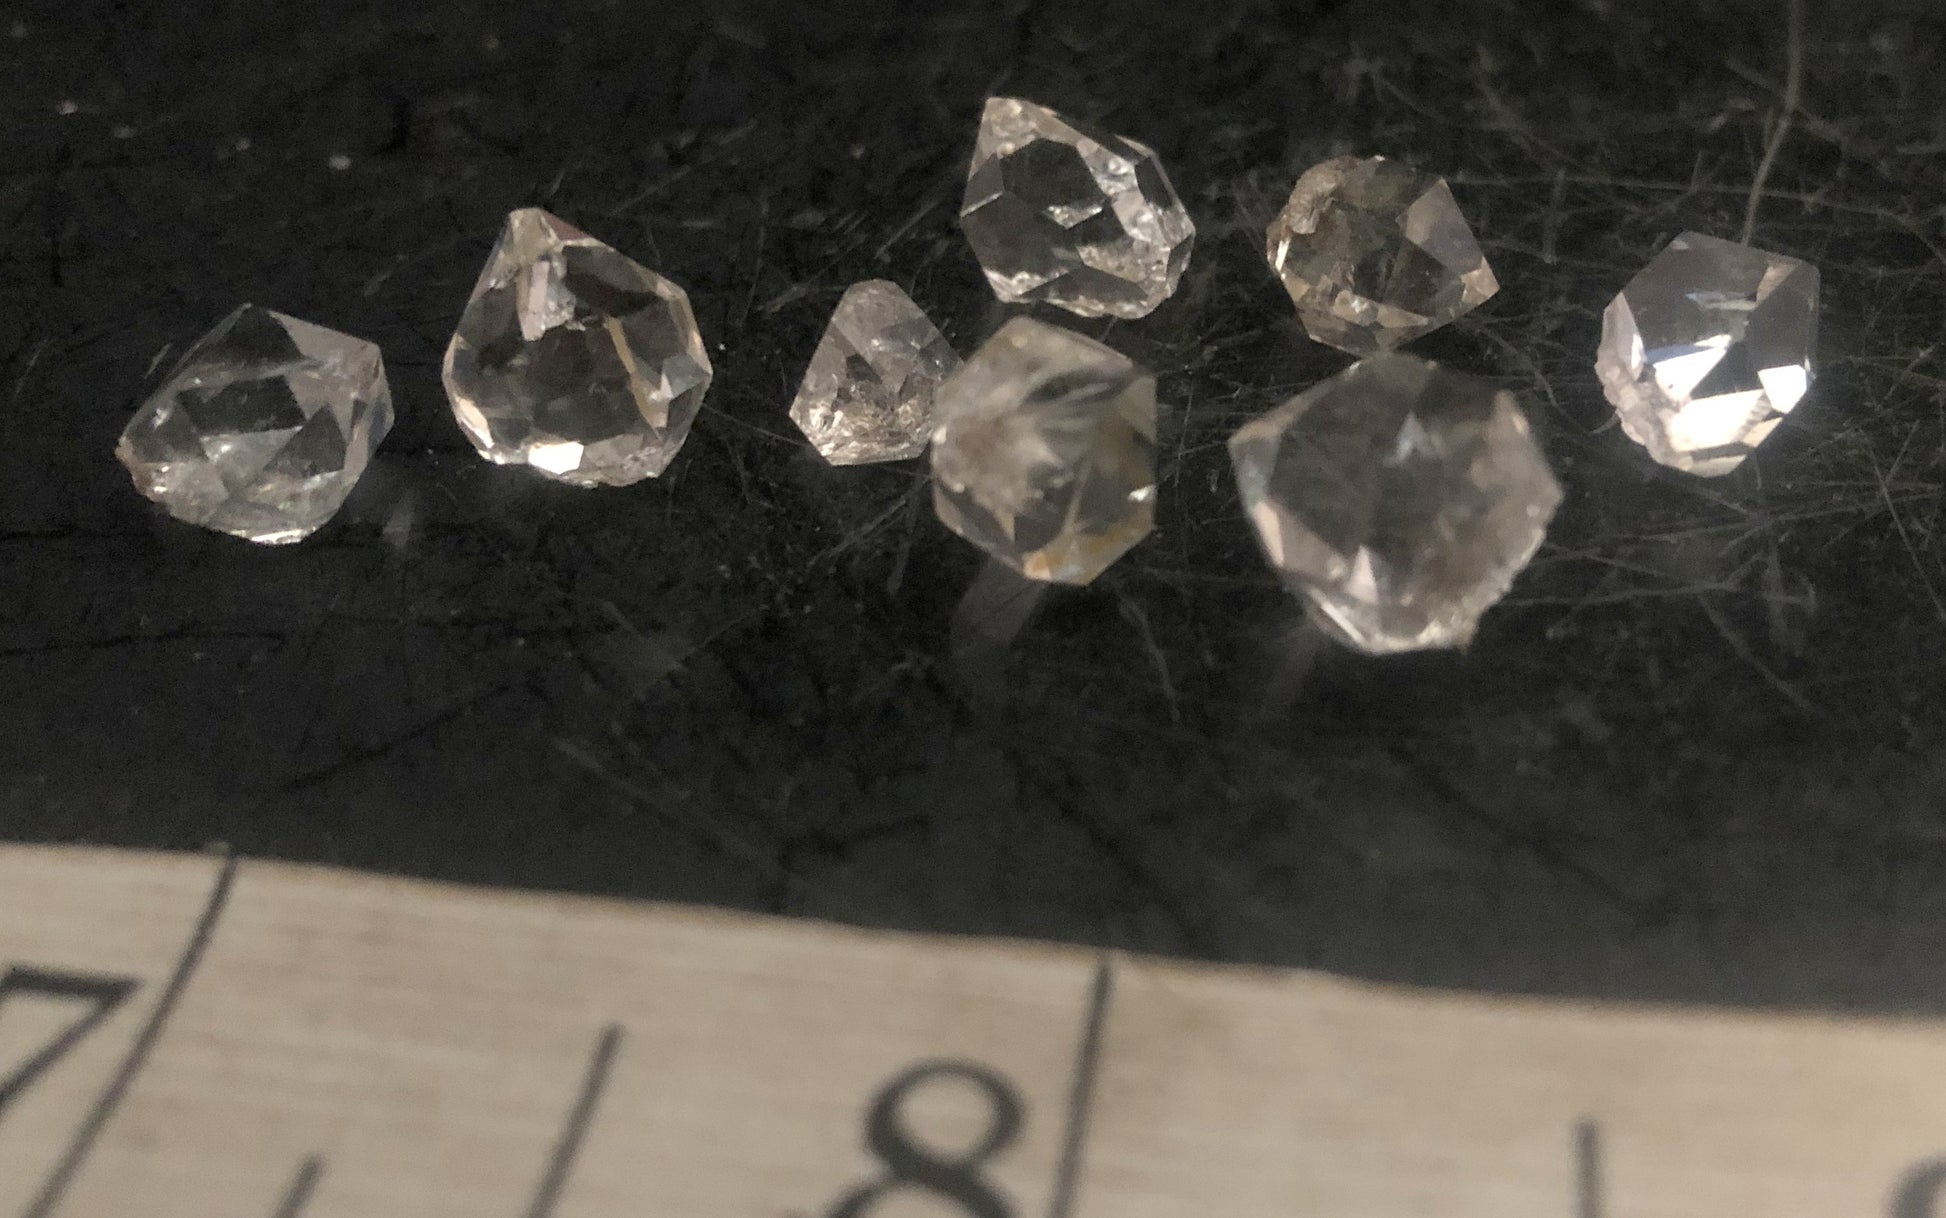 Herkimer Diamond Lot 1207-46 | Of Coins & Crystals